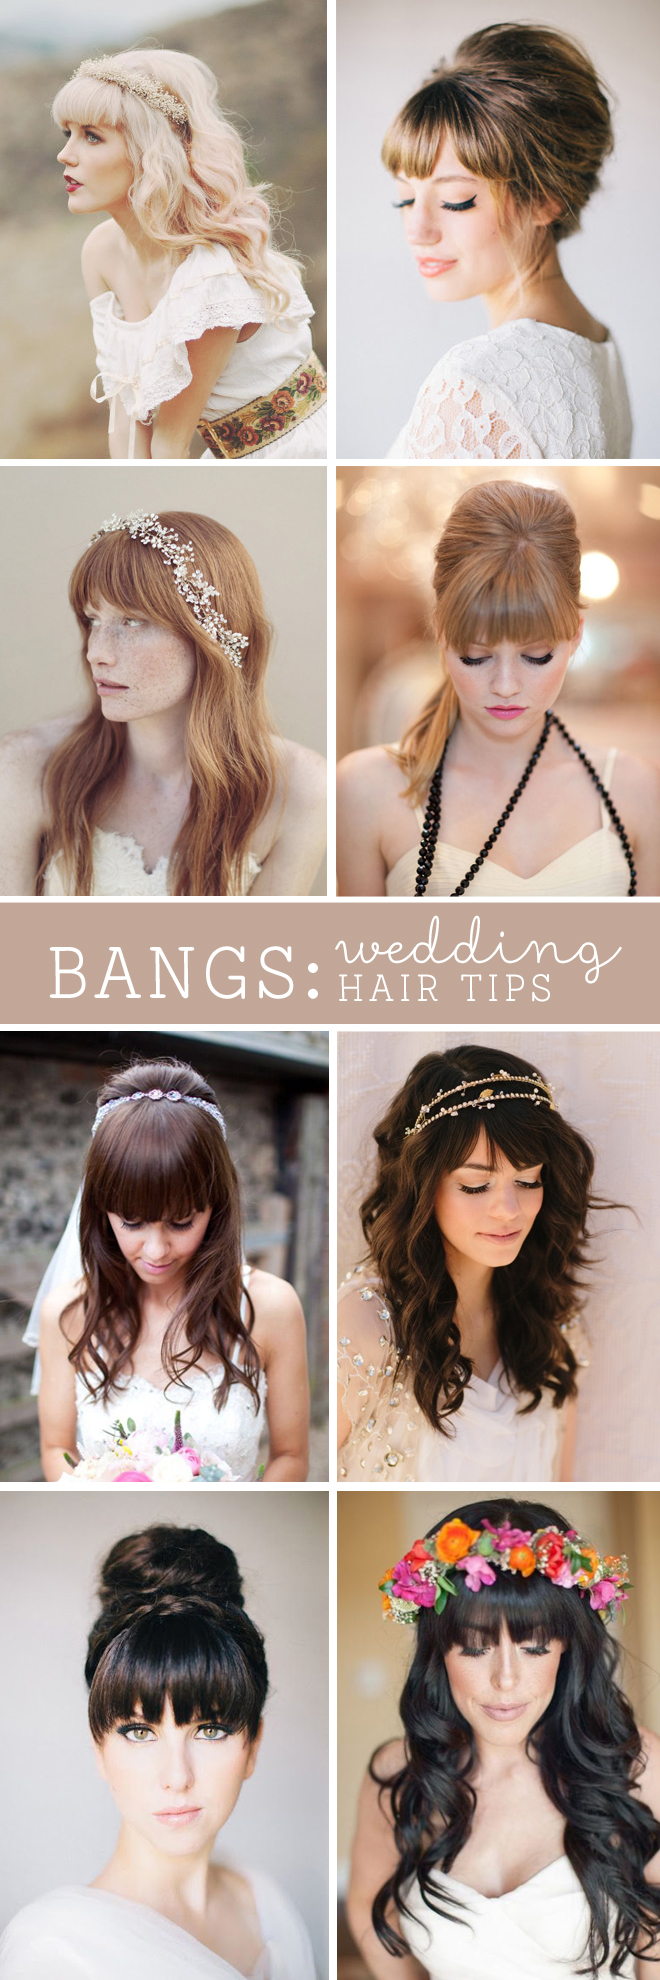 Check out these professional hair dresser tips on wedding hair styles with full bangs!